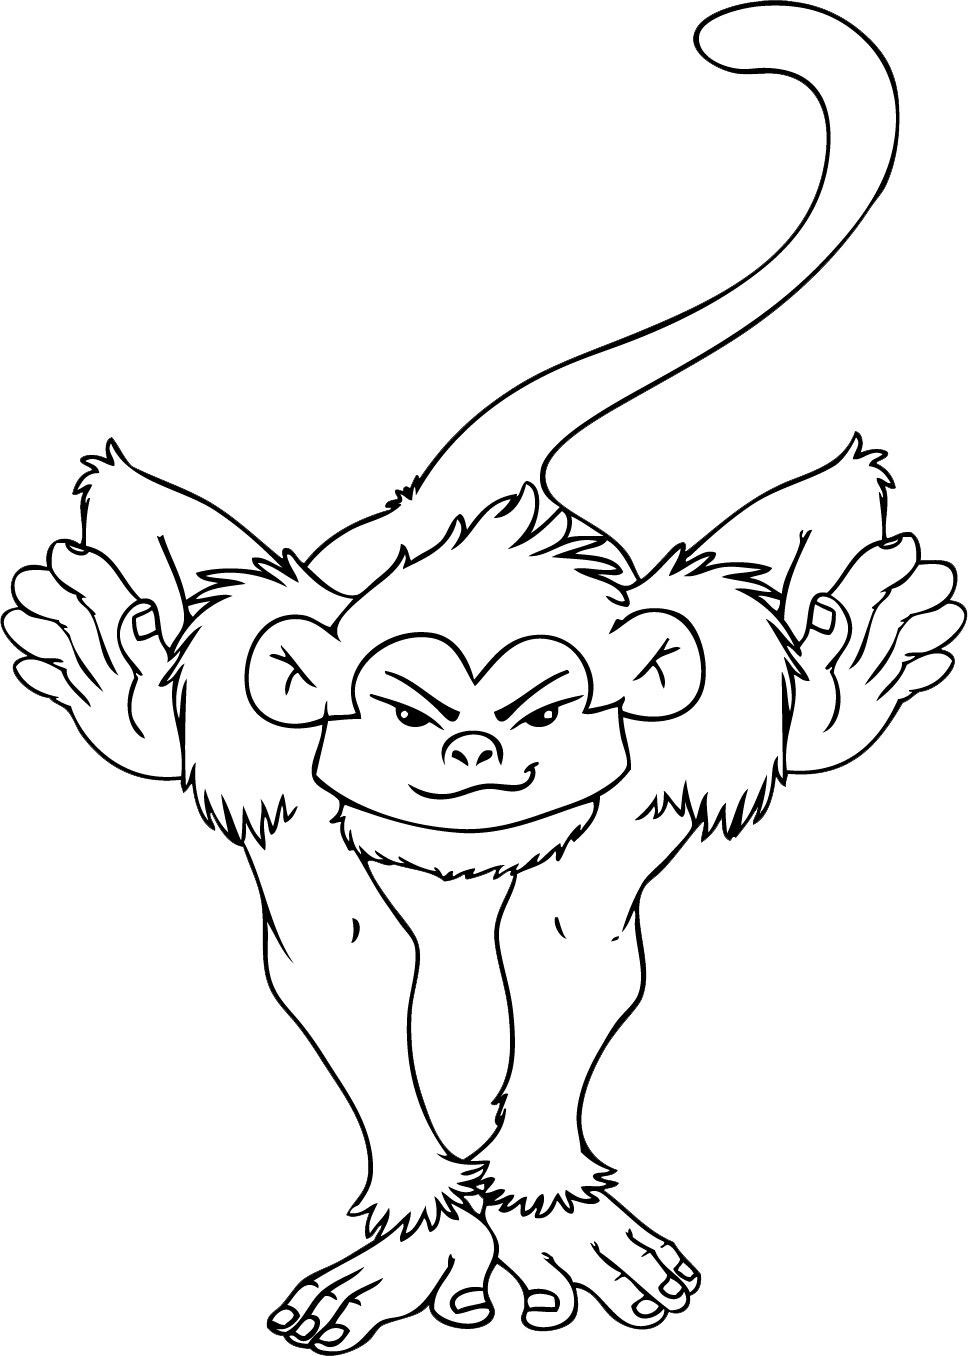 Spider Monkey coloring #5, Download drawings